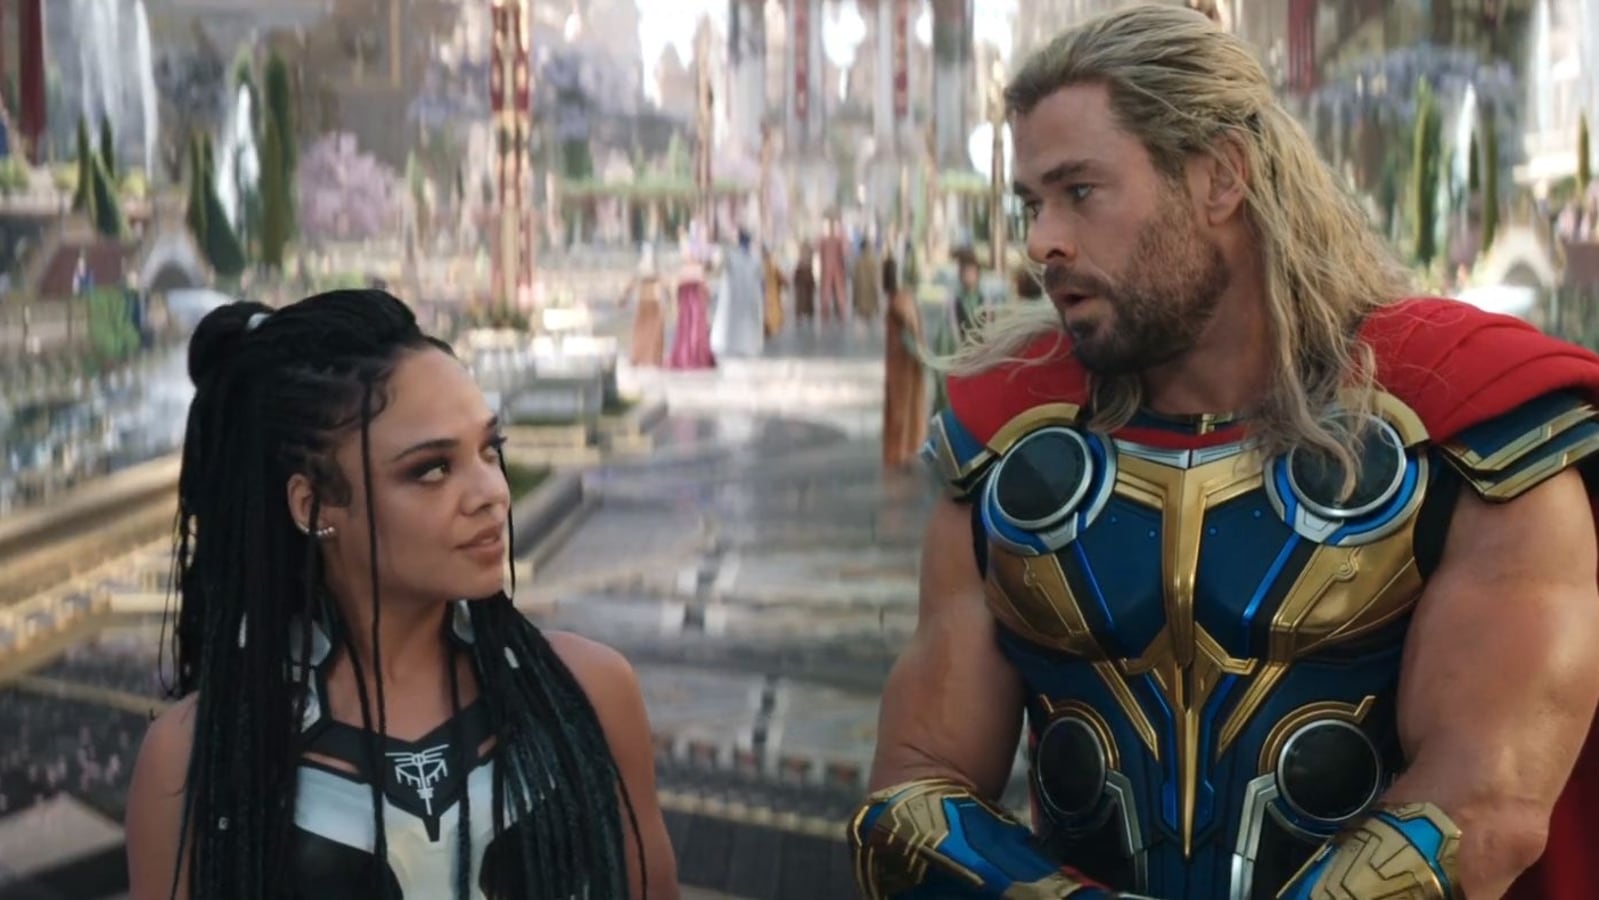 Thor Love And Thunder Box Office Collection Day 5: Chris Hemsworth's film  clocks in impressive numbers